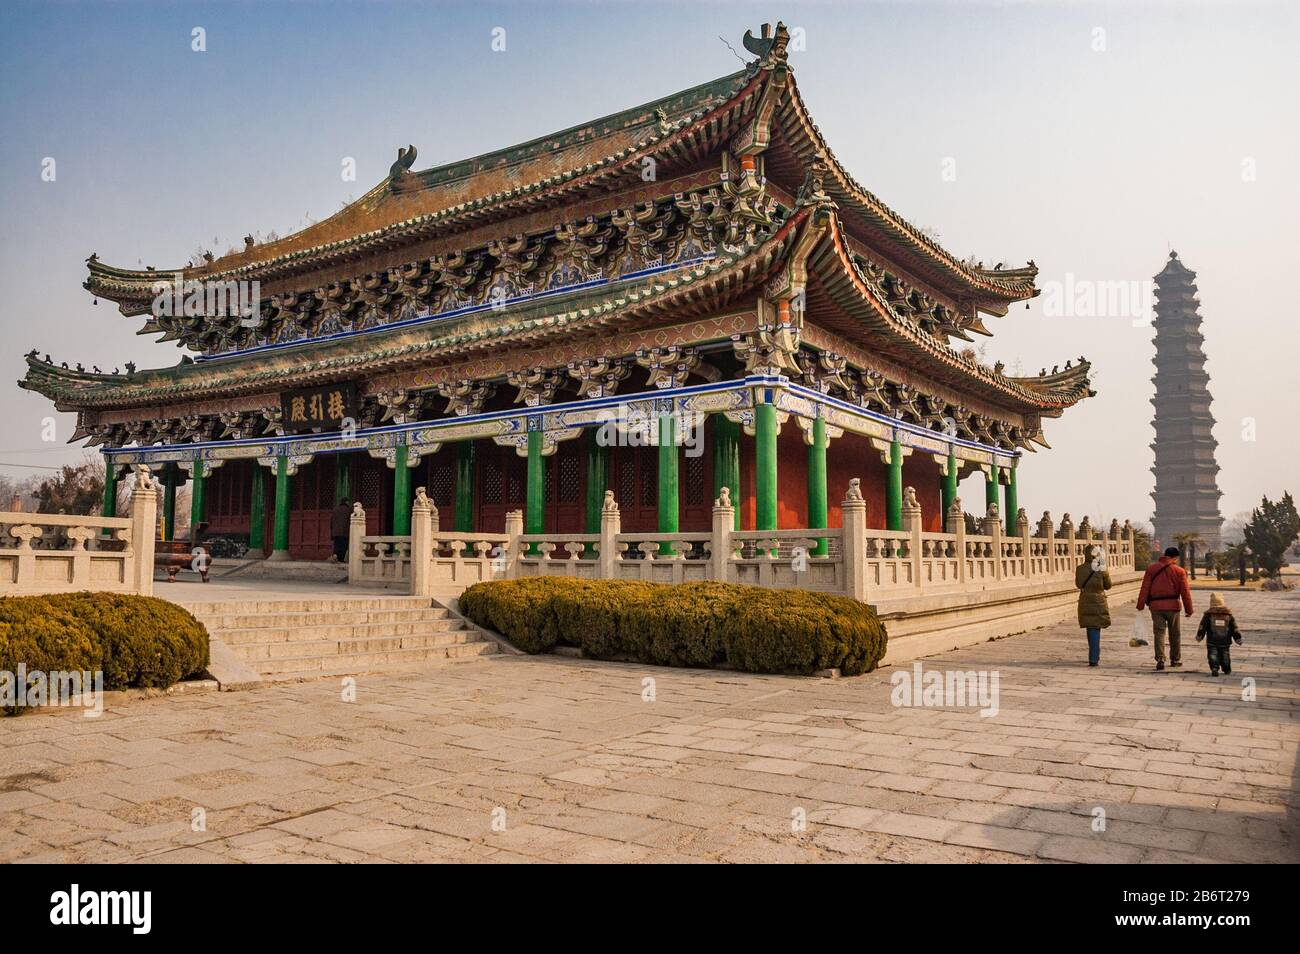 Jieyin Hall with the Iron Pagoda behind in Iron Pagoda Park, Kaifeng. Kaifeng was the capital of the Northern Song Dynasty. Henan Province, China. Stock Photo